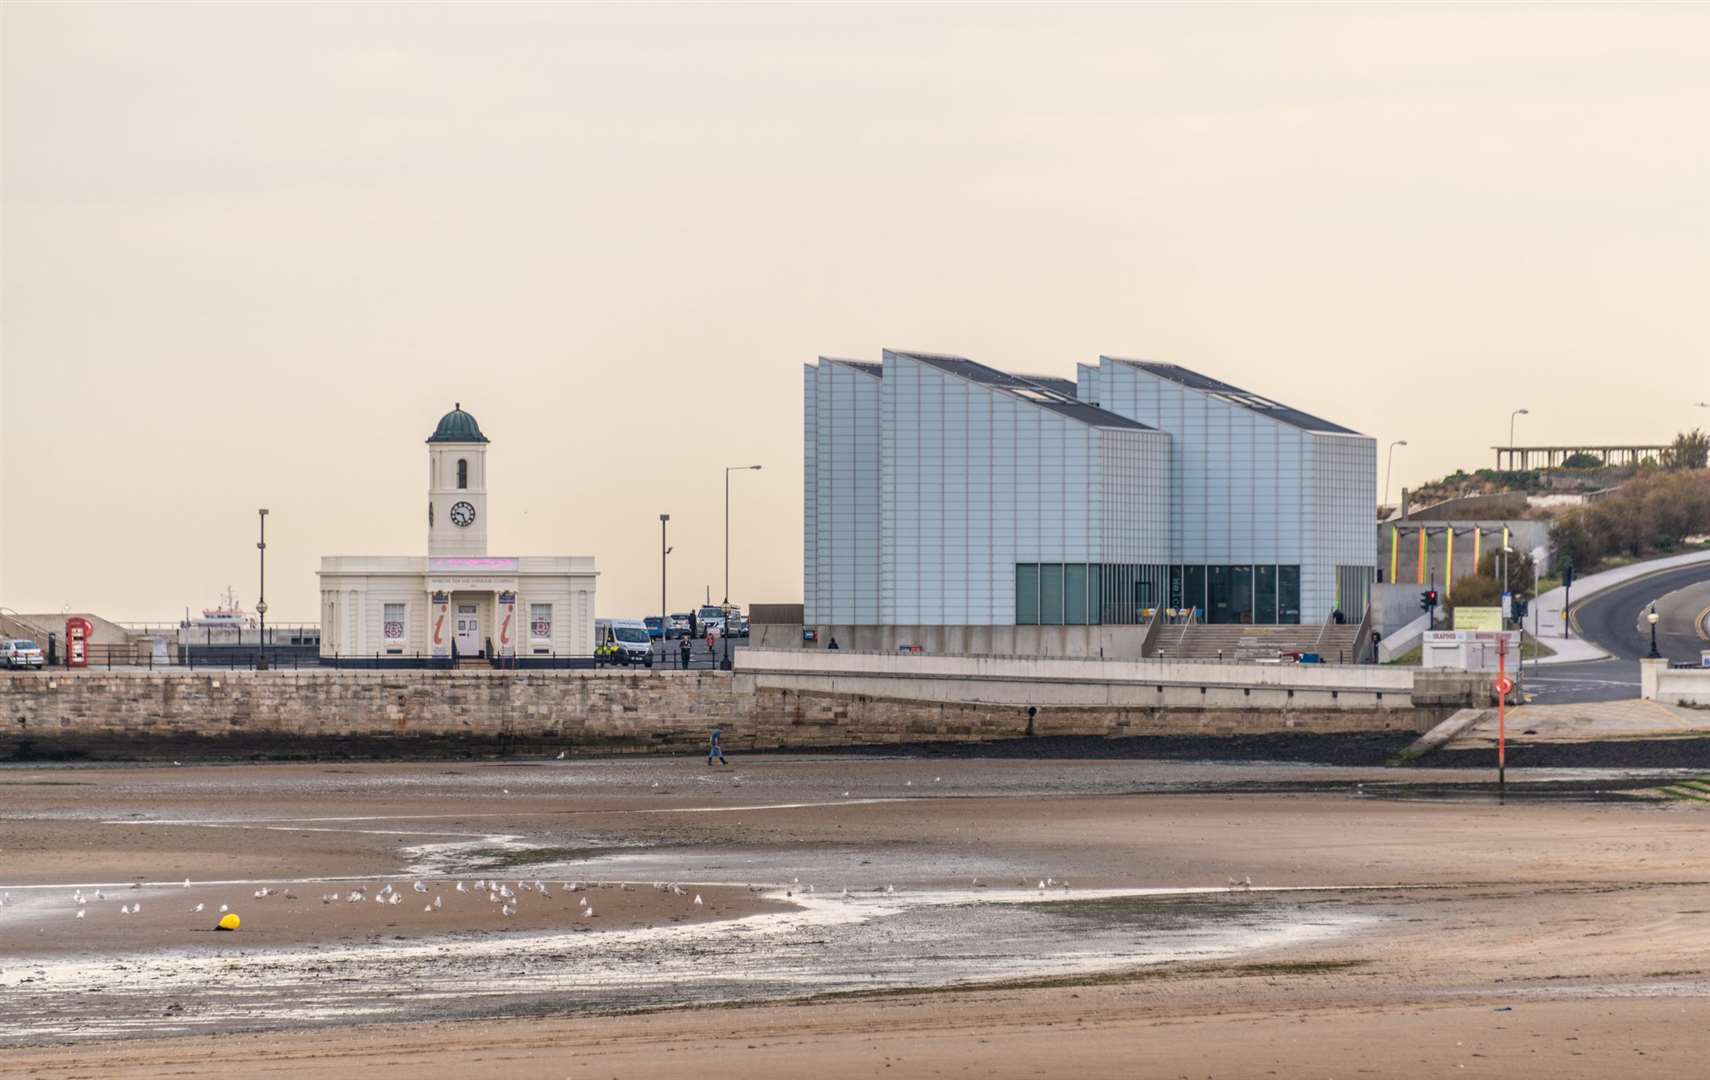 Margate is set to receive £22.2m